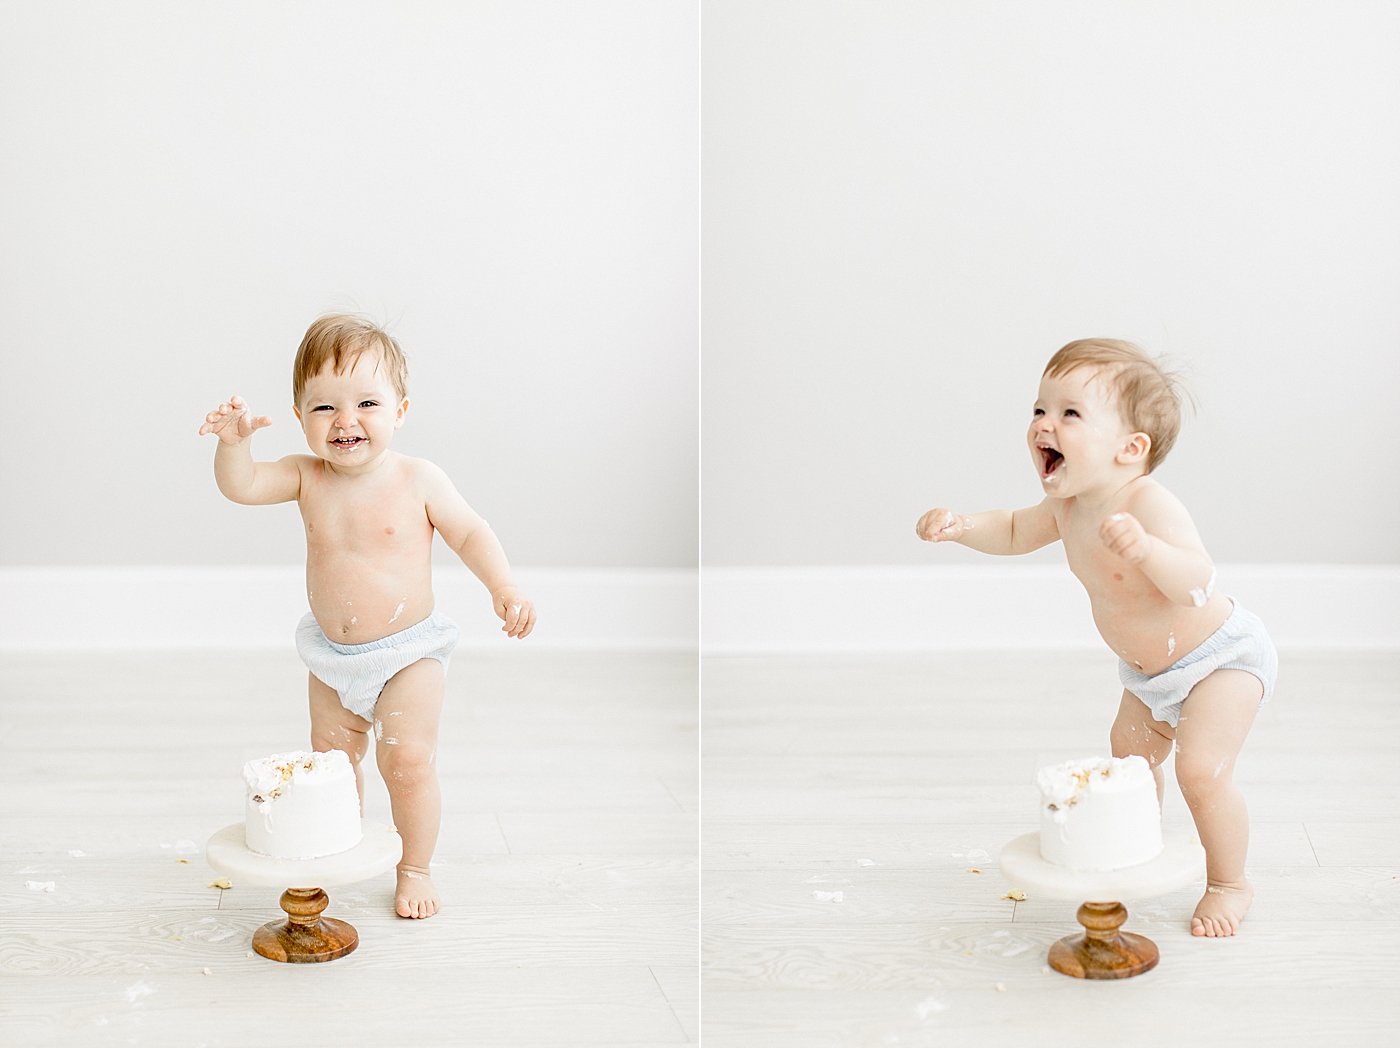 One year old boy standing up and smiling after his birthday cake smash. Photo by Brittany Elise Photography.